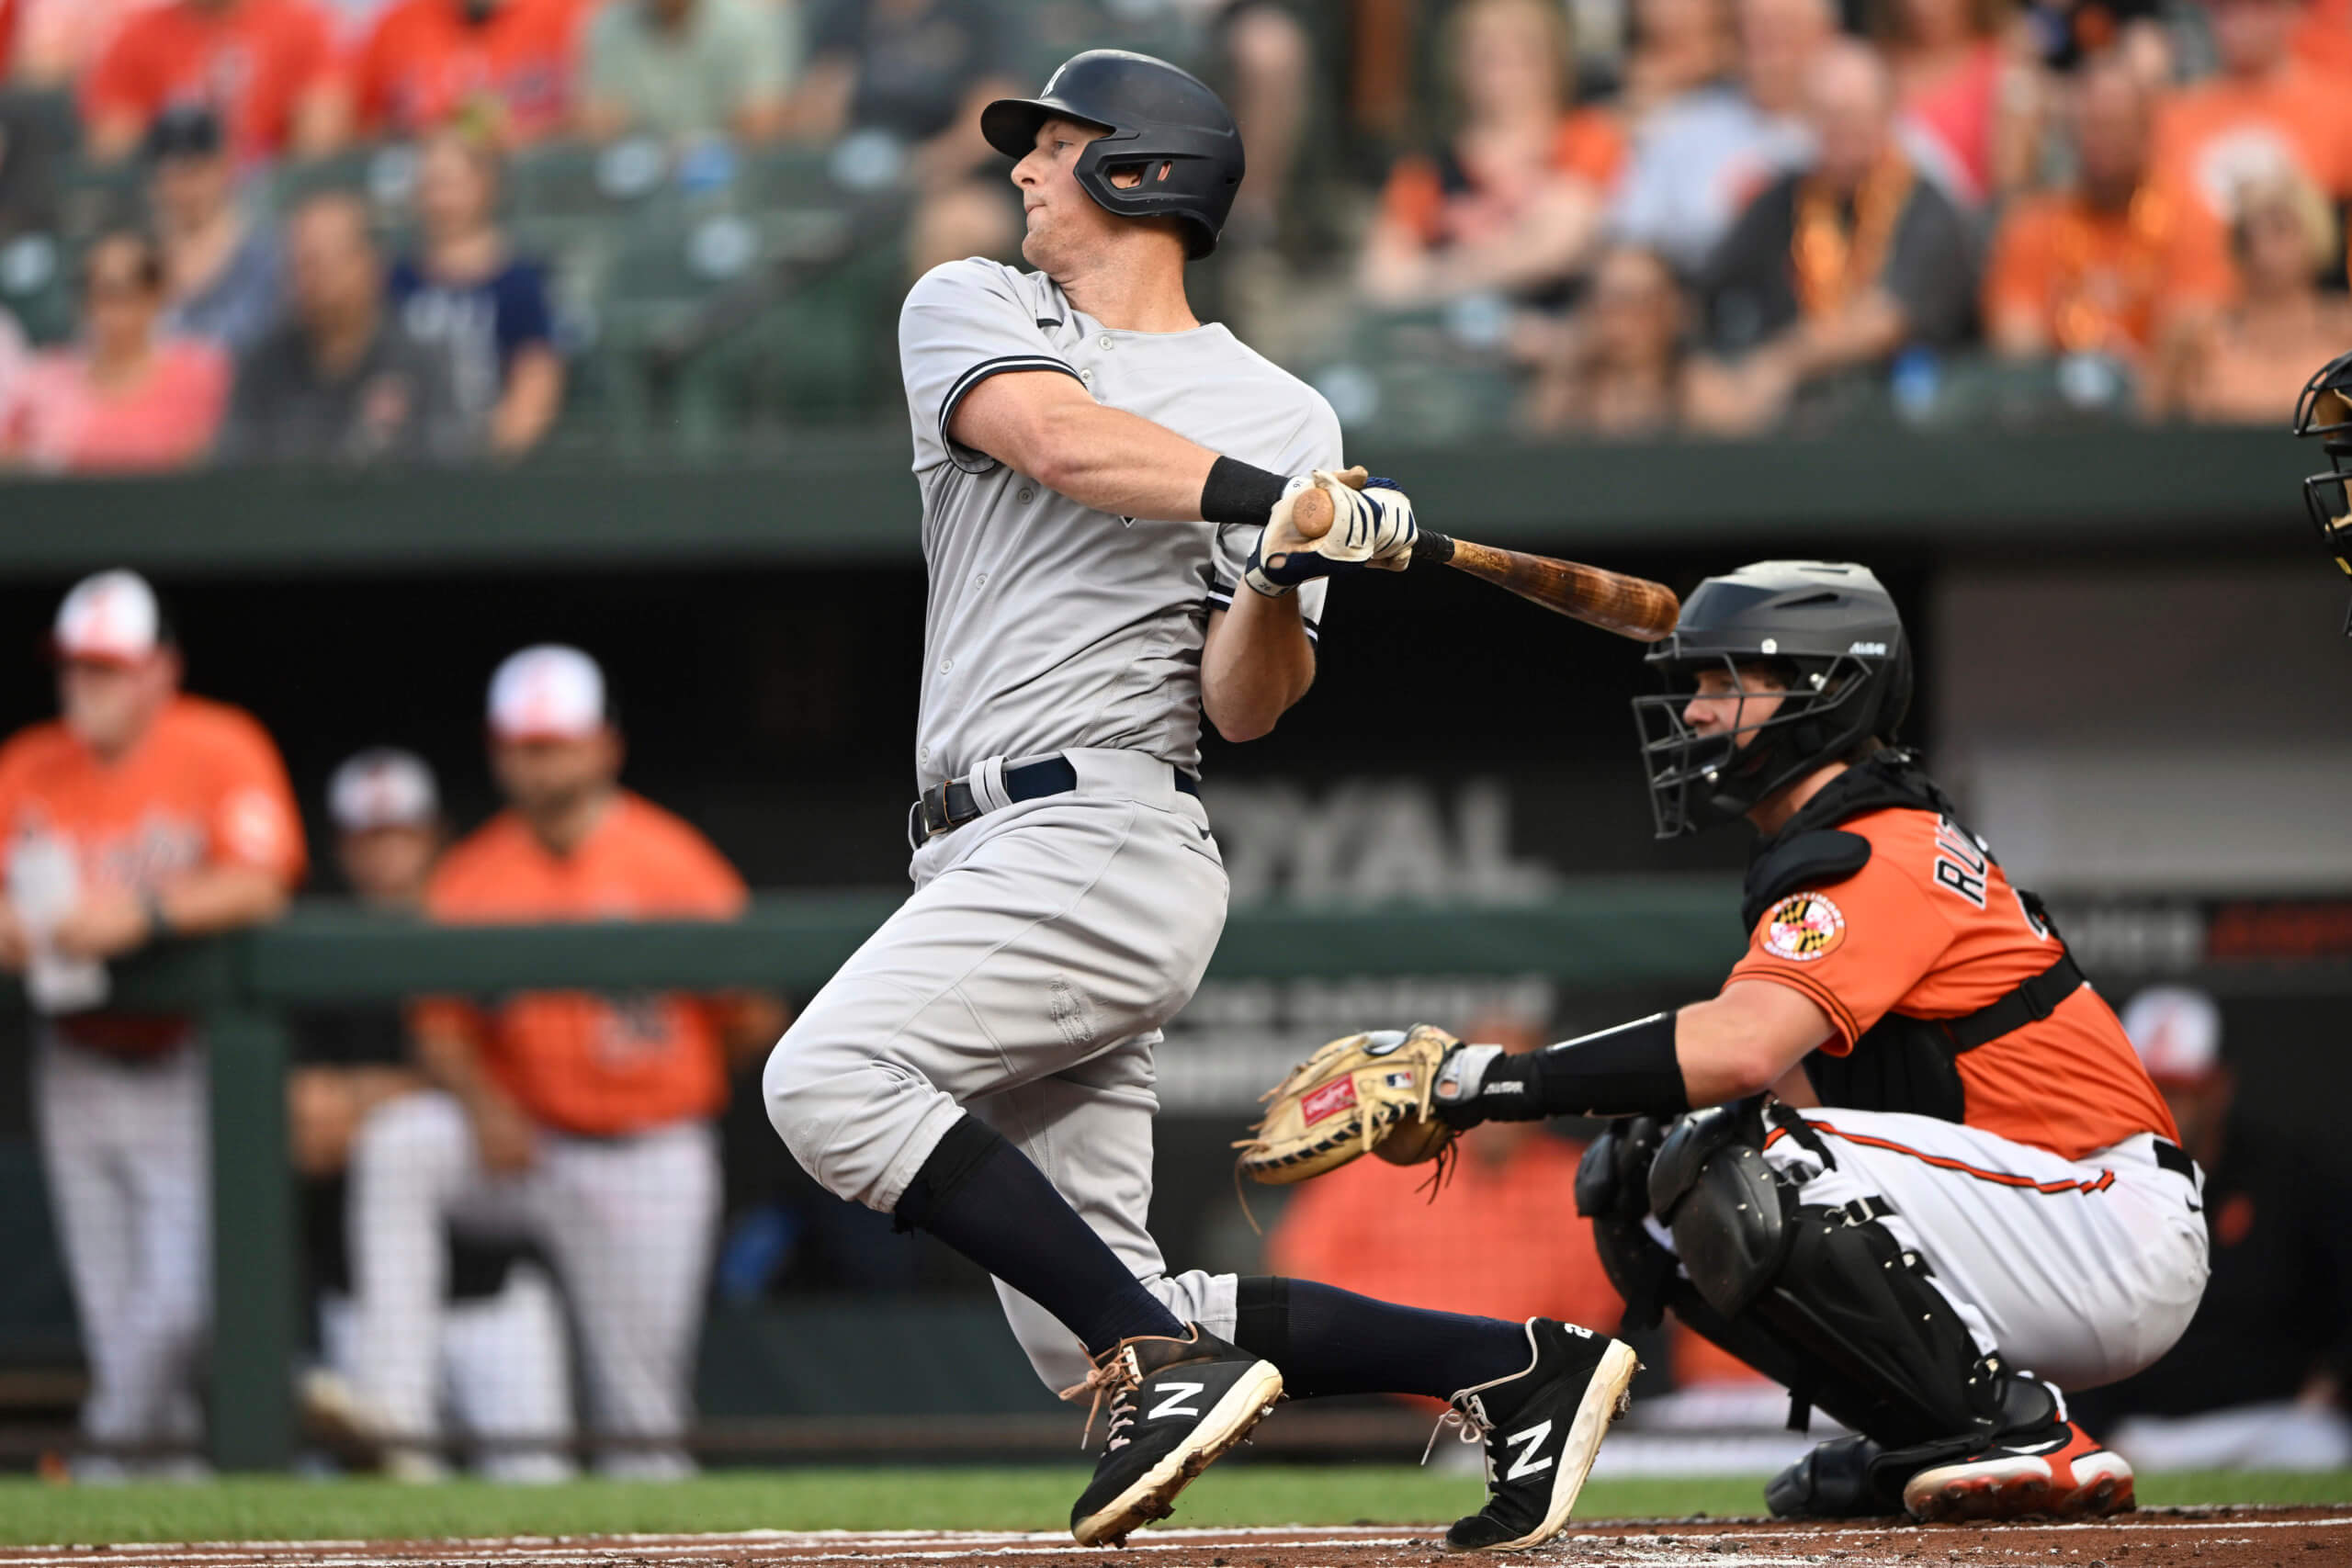 New York Yankees news: DJ LeMahieu could return by Friday